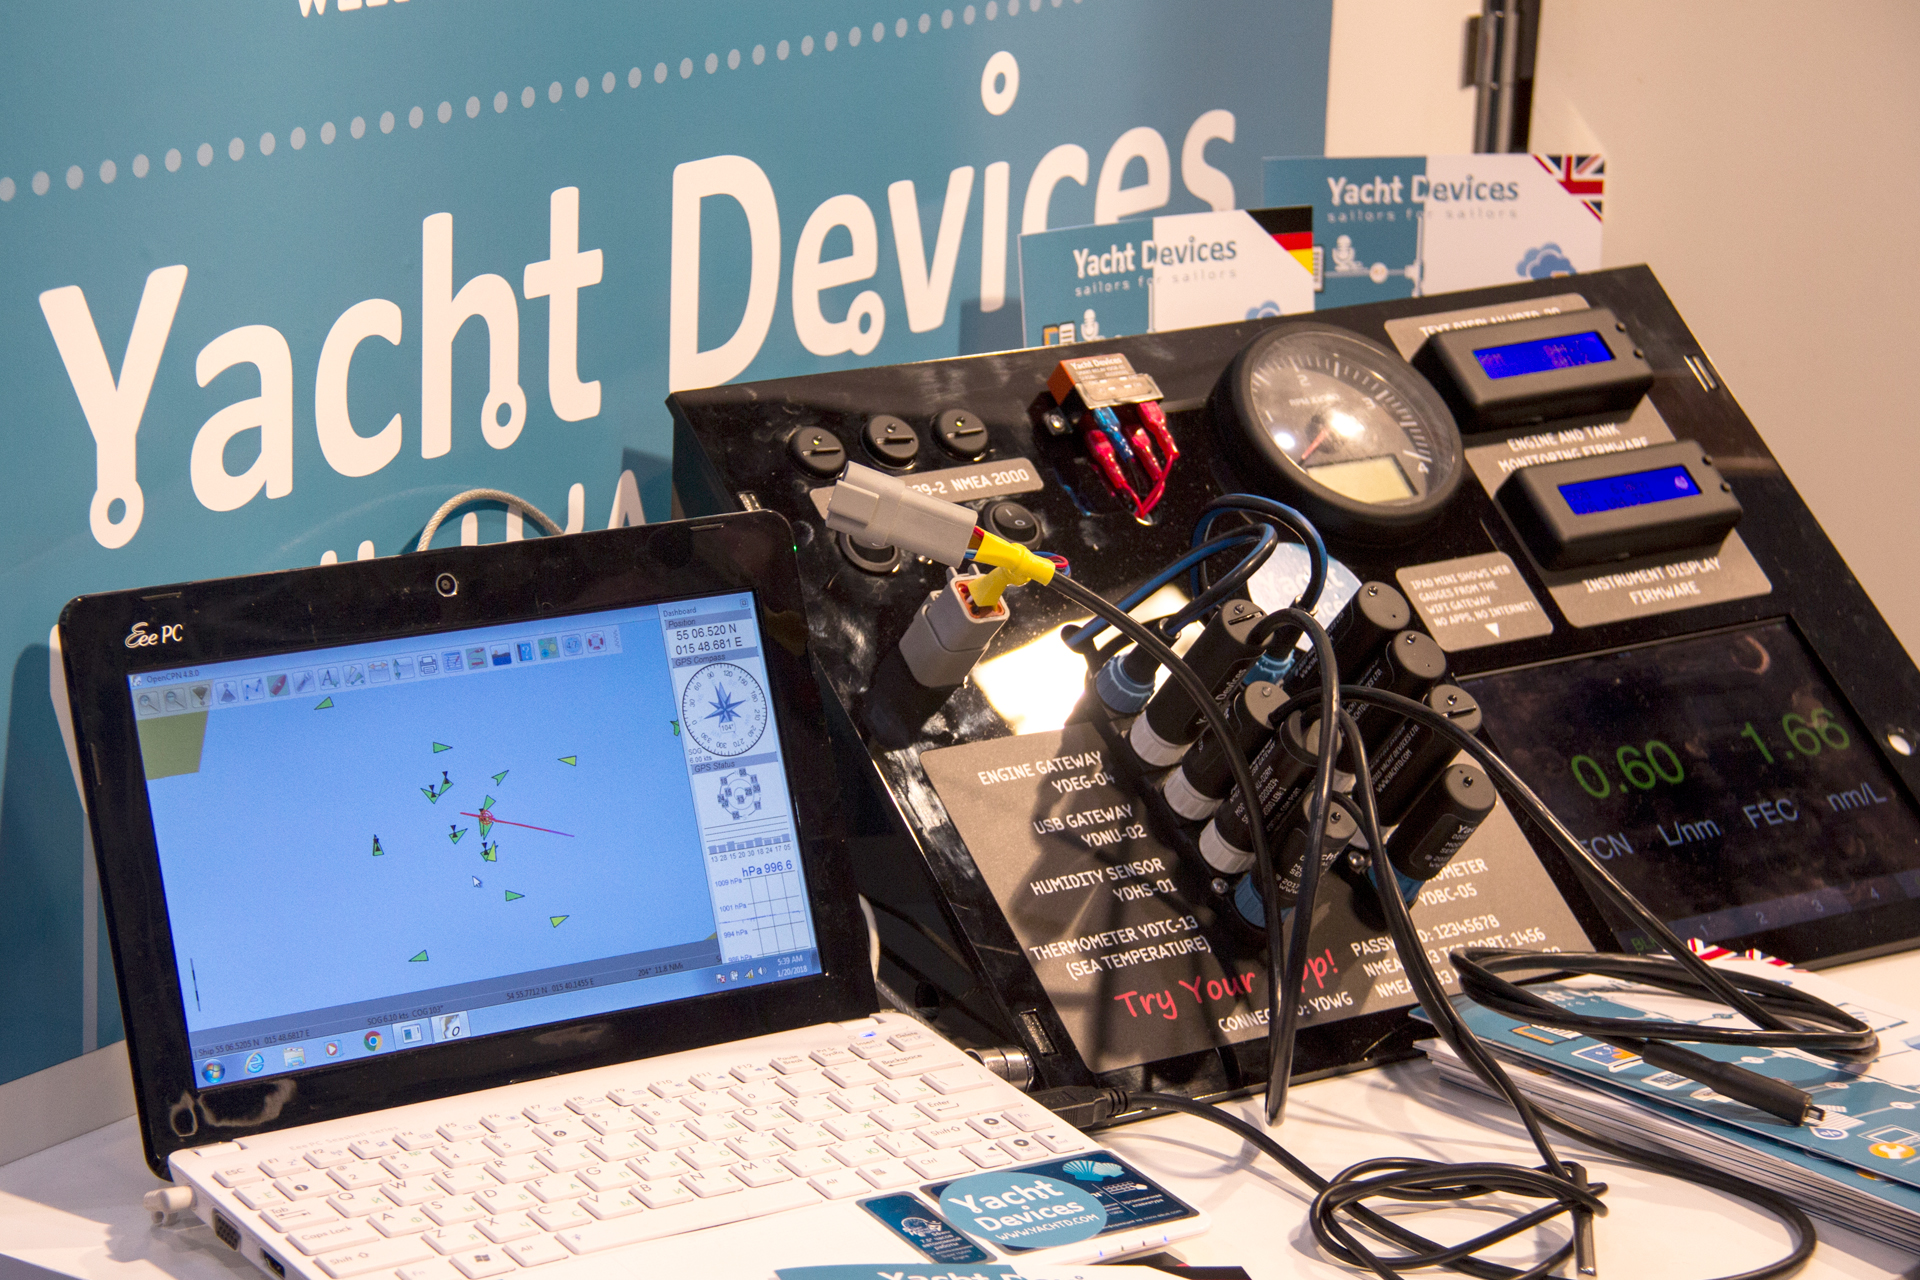 Yacht Devices booth at Dusseldorf Boot Show 2018